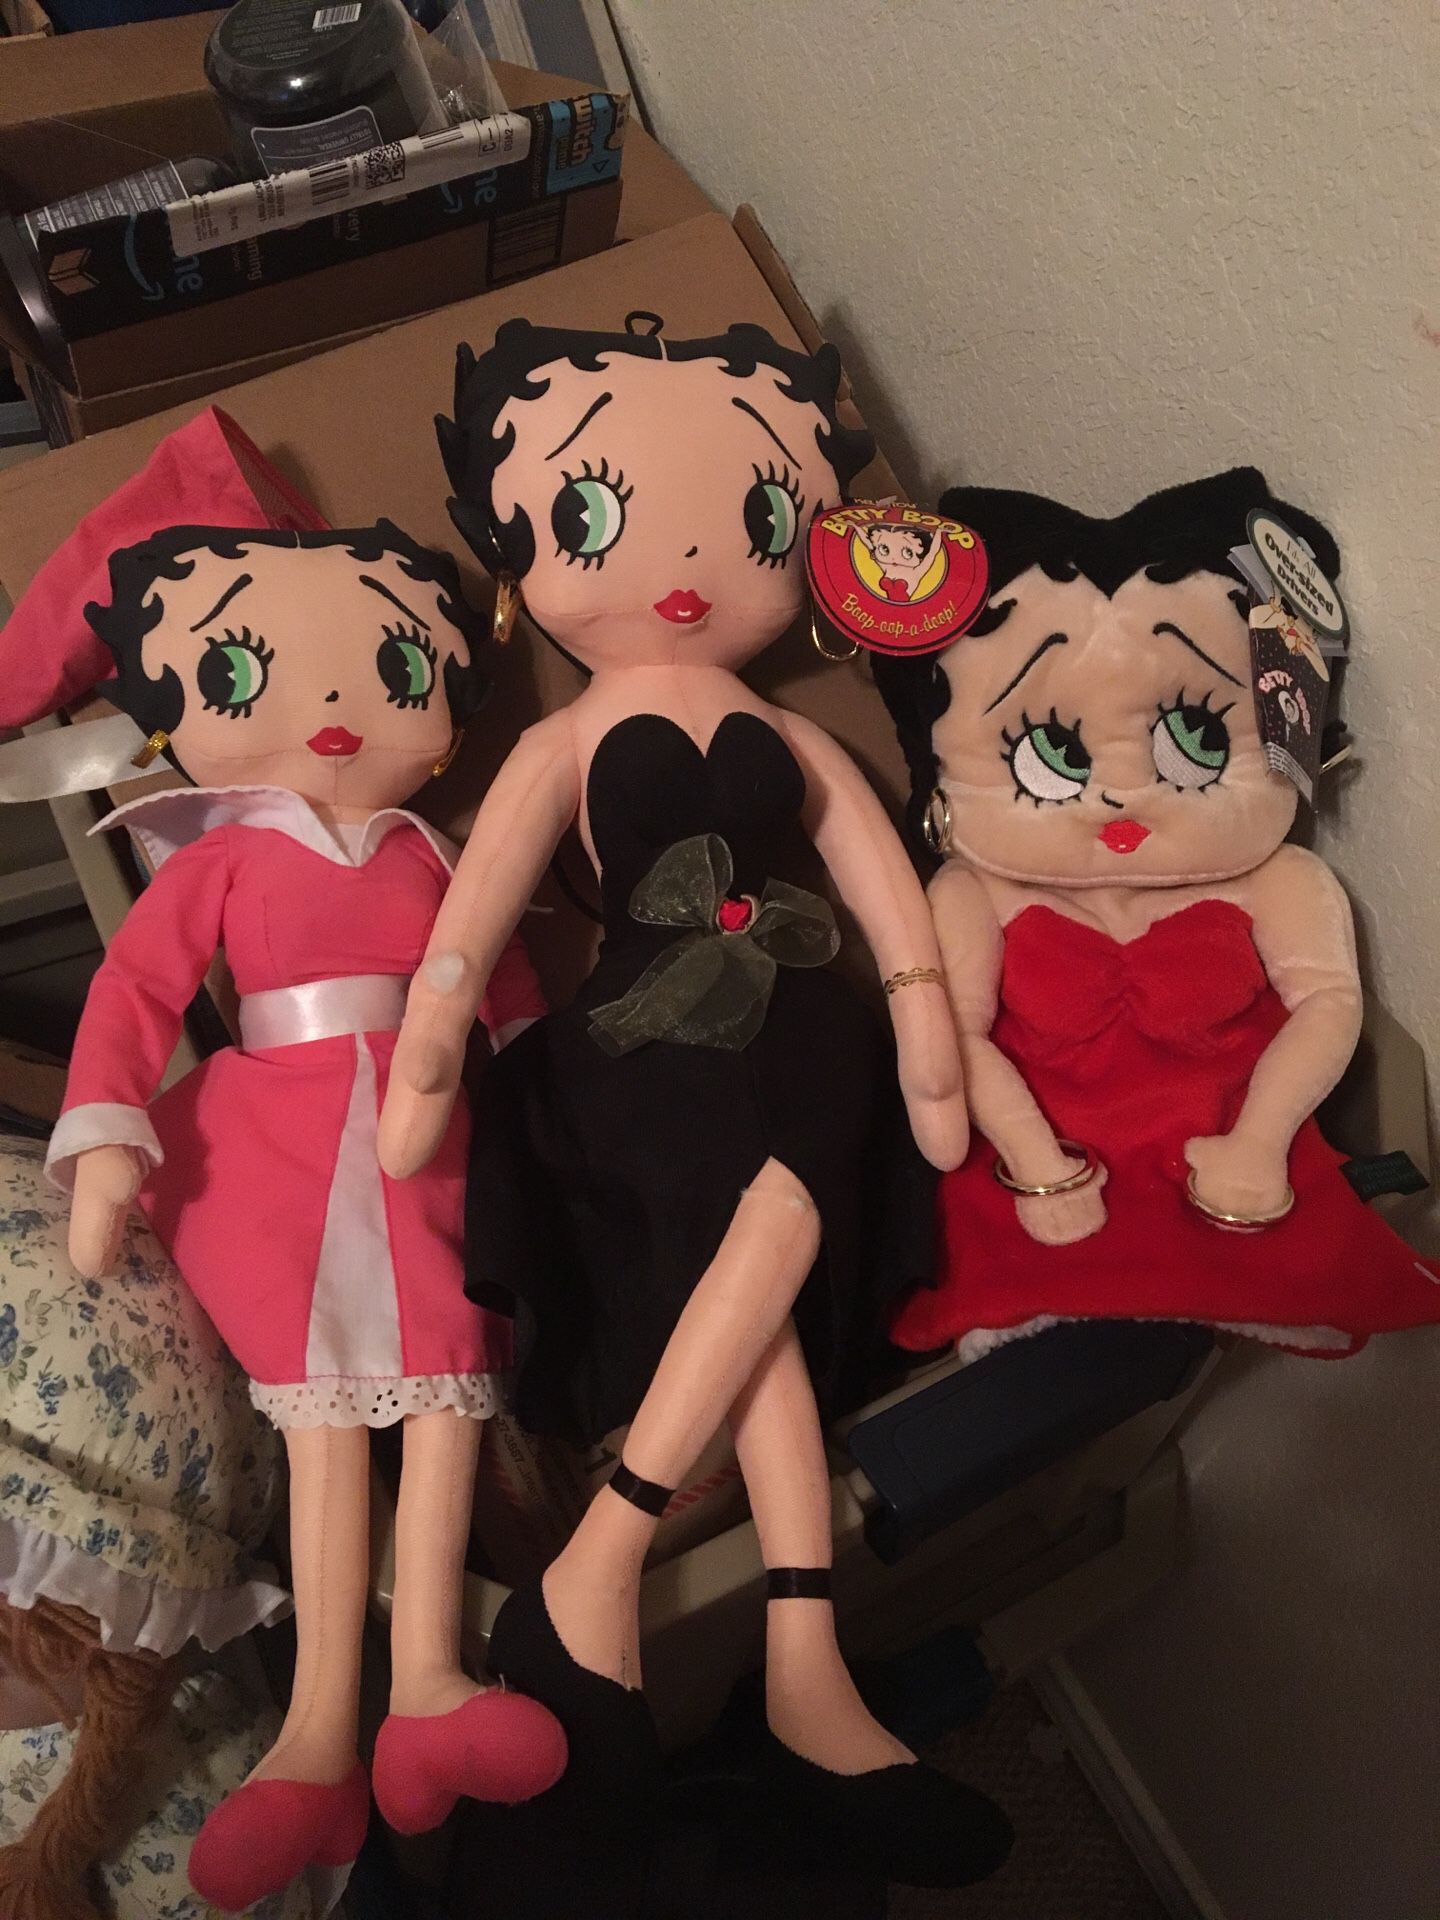 3 BETTY BOOP dolls - $ 5 for all